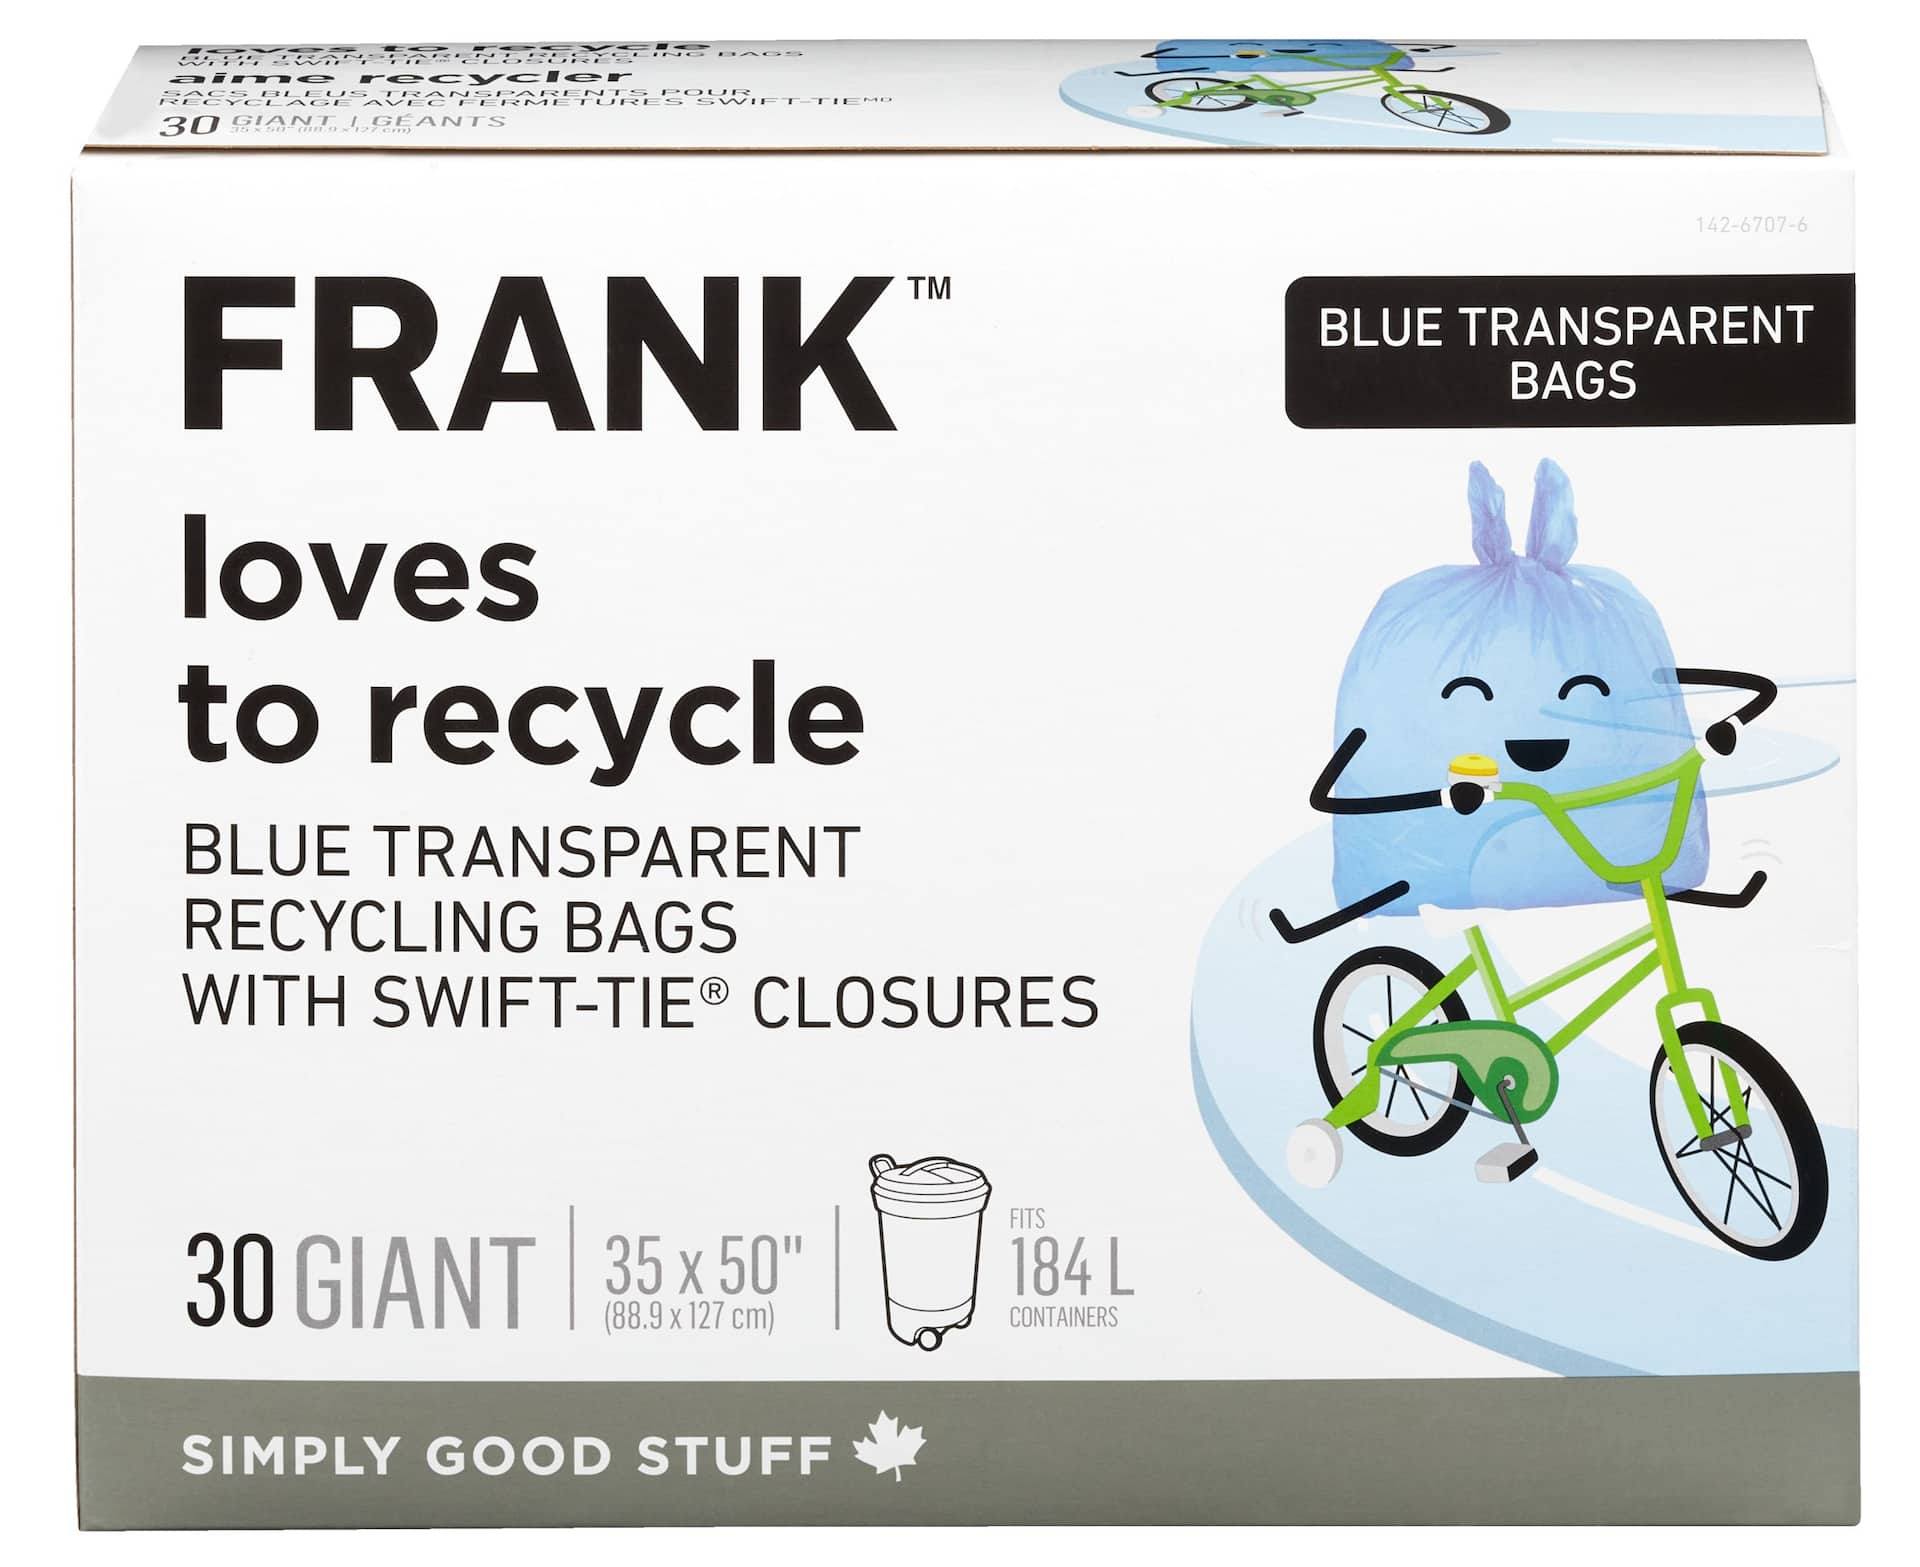 https://media-www.canadiantire.ca/product/living/cleaning/refuse-bags/1426707/frank-giant-blue-recycle-bags-184l-30ct-a1ace6ed-1599-4aa6-b5e8-f934d605111c-jpgrendition.jpg